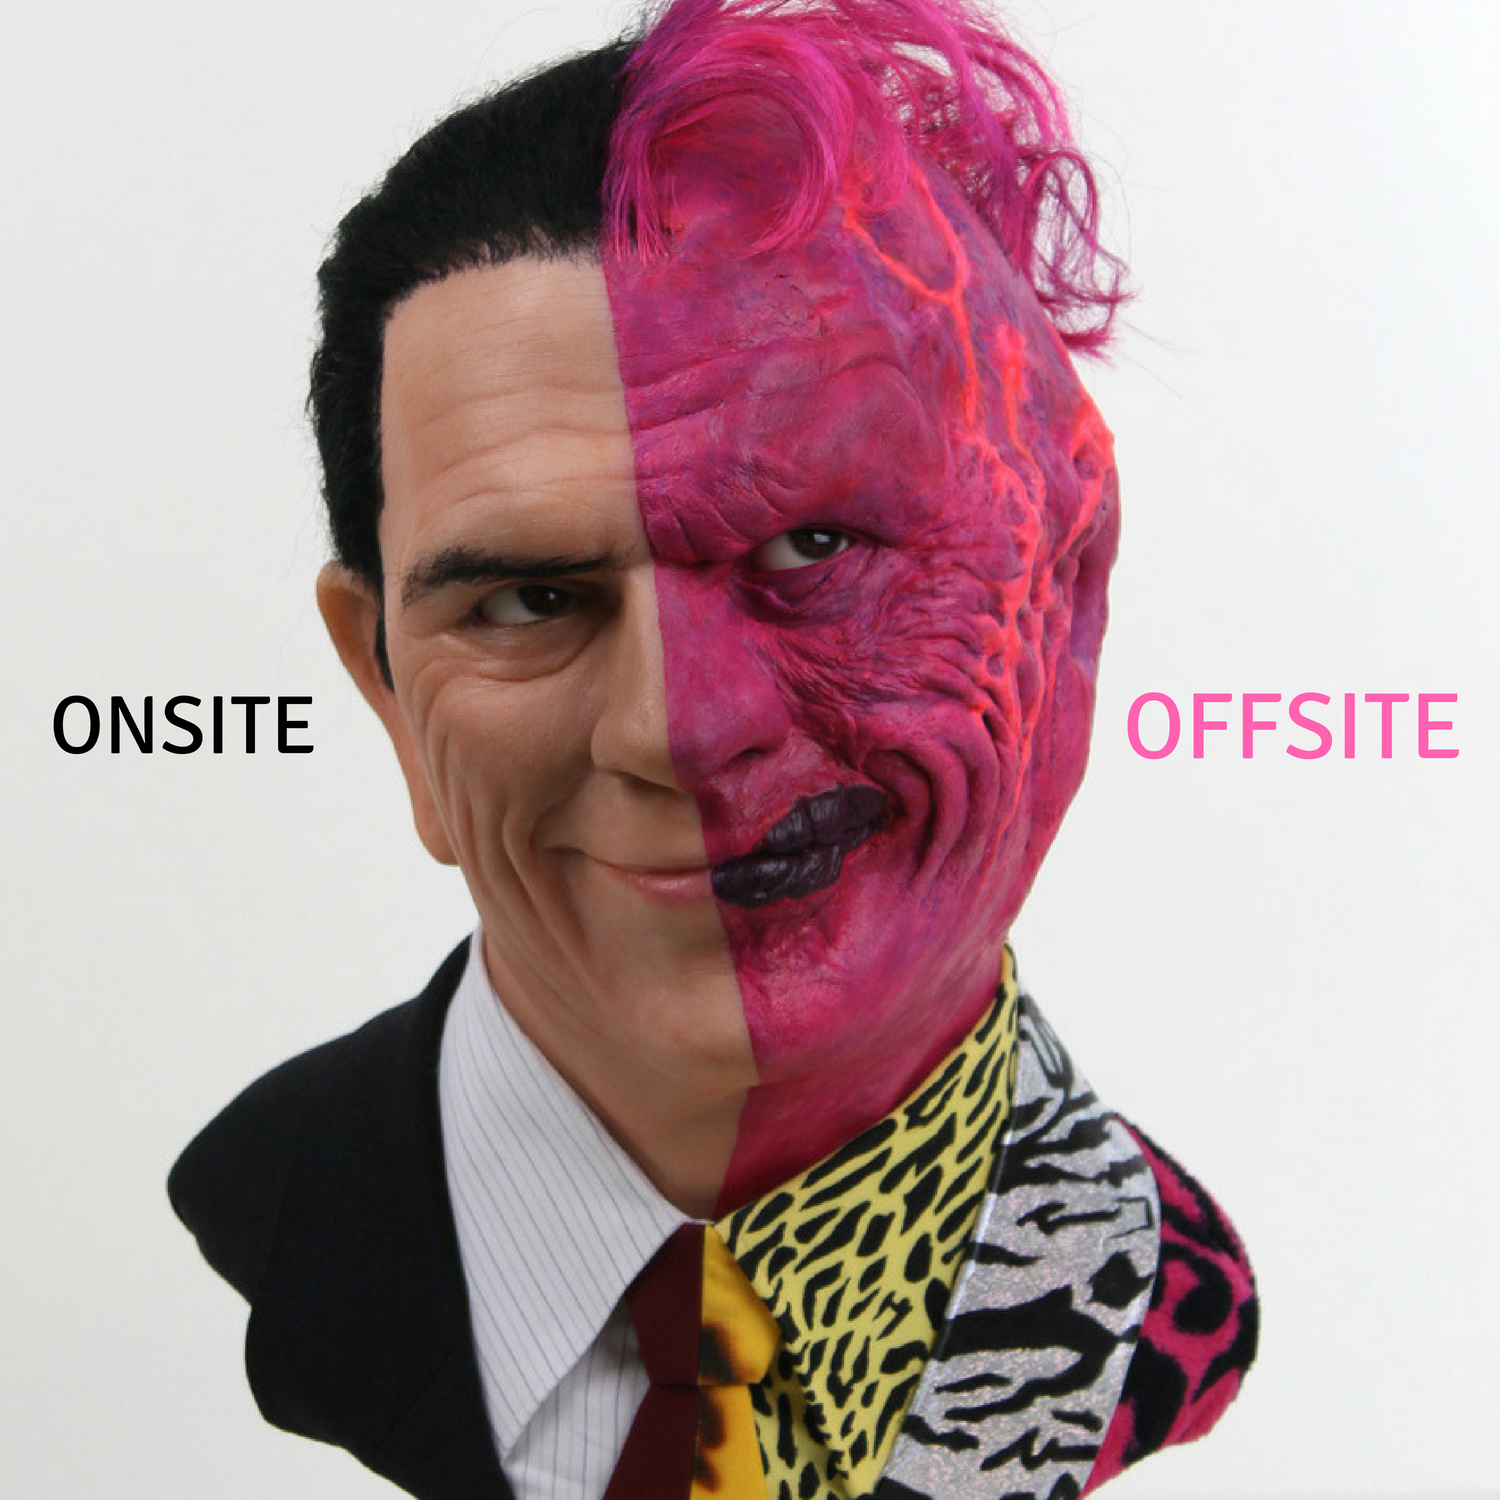 Two Faces Of Onsite and Offsite SEO Image